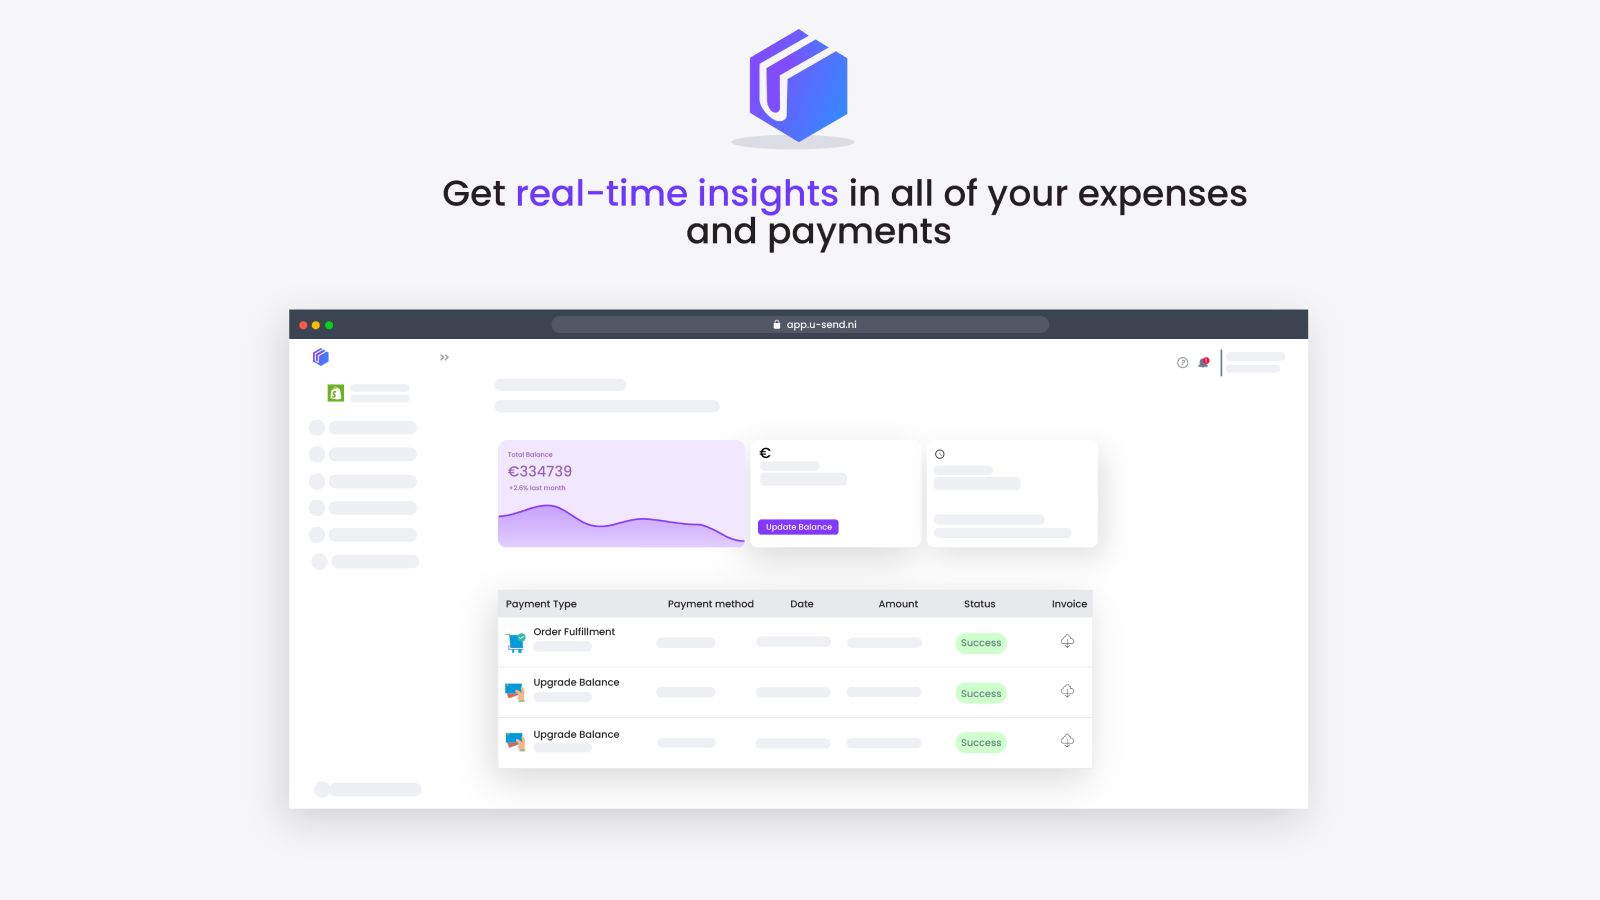 Payments insights